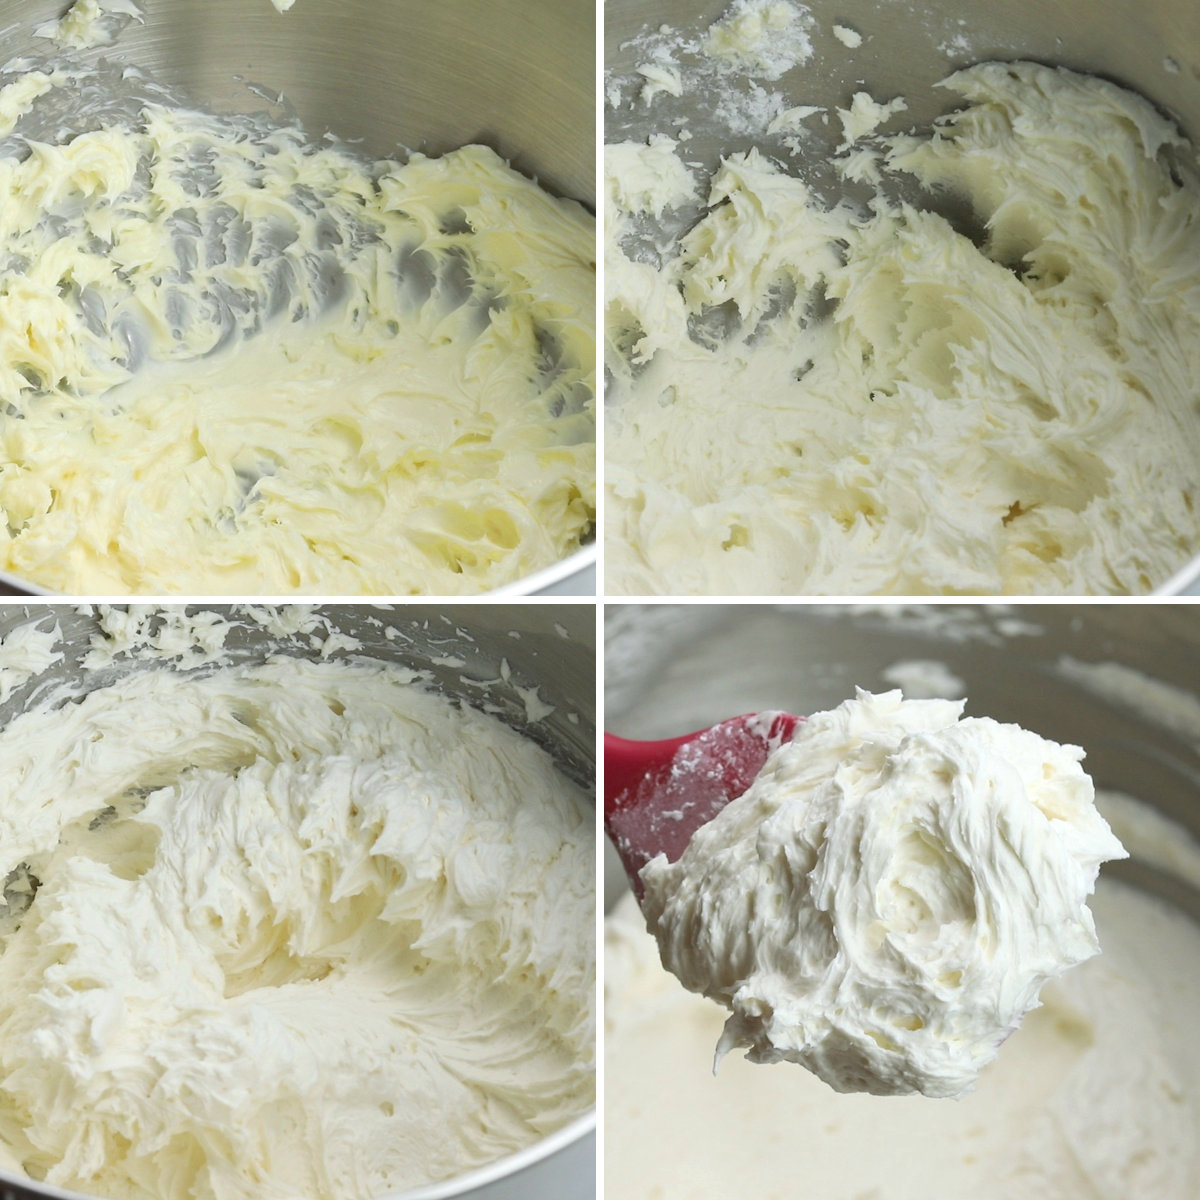 Mixing butter and confectioner's sugar in a metal bowl.